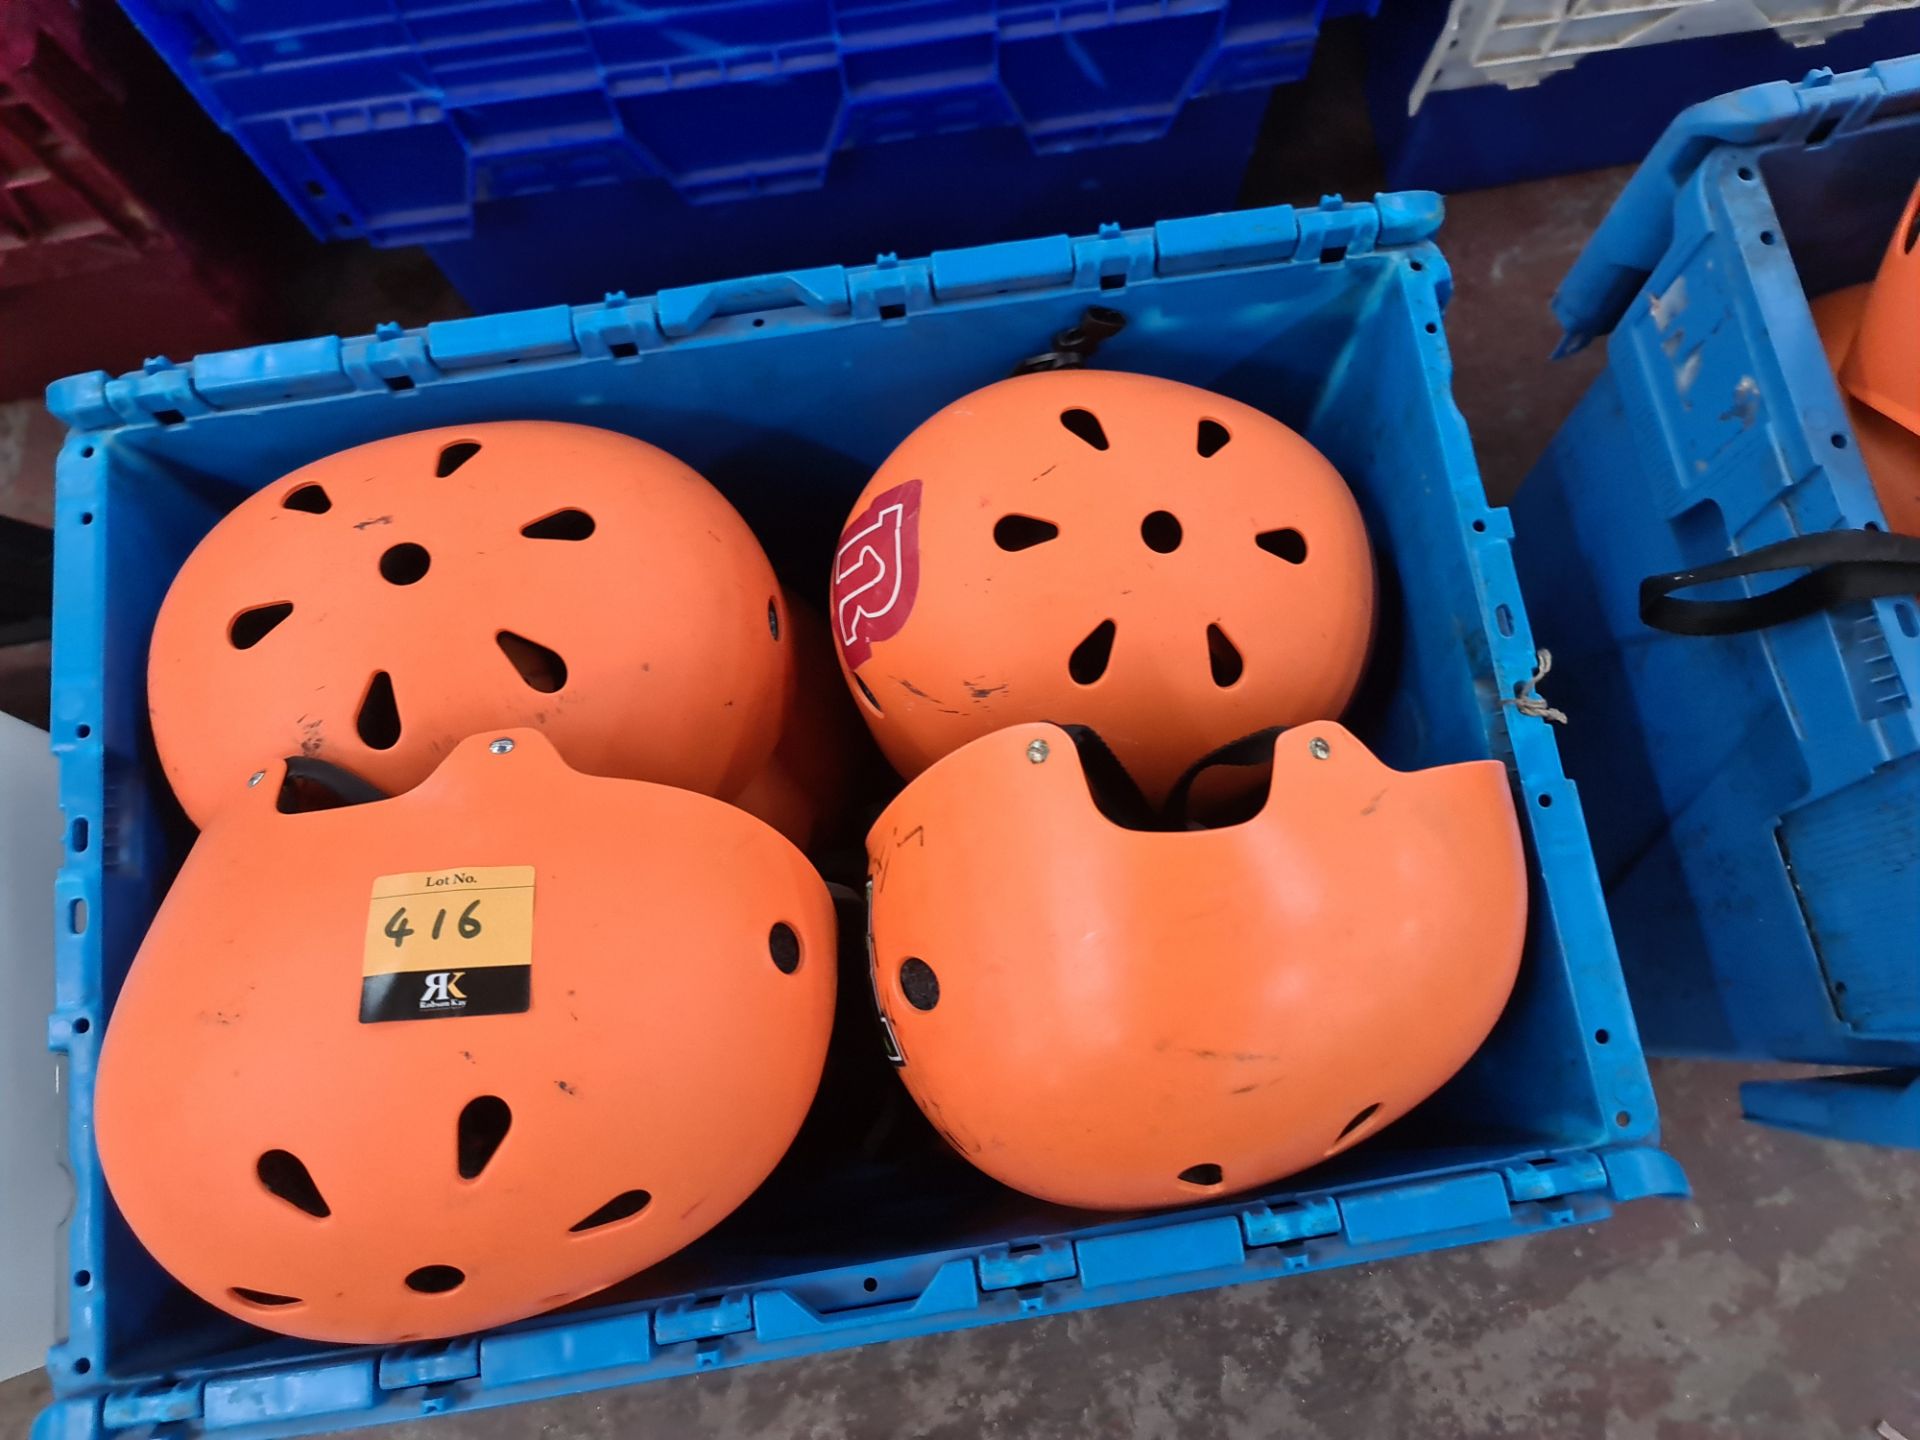 10 off assorted orange safety helmets, assumed to be by Pro Tec and possibly others - ex rental